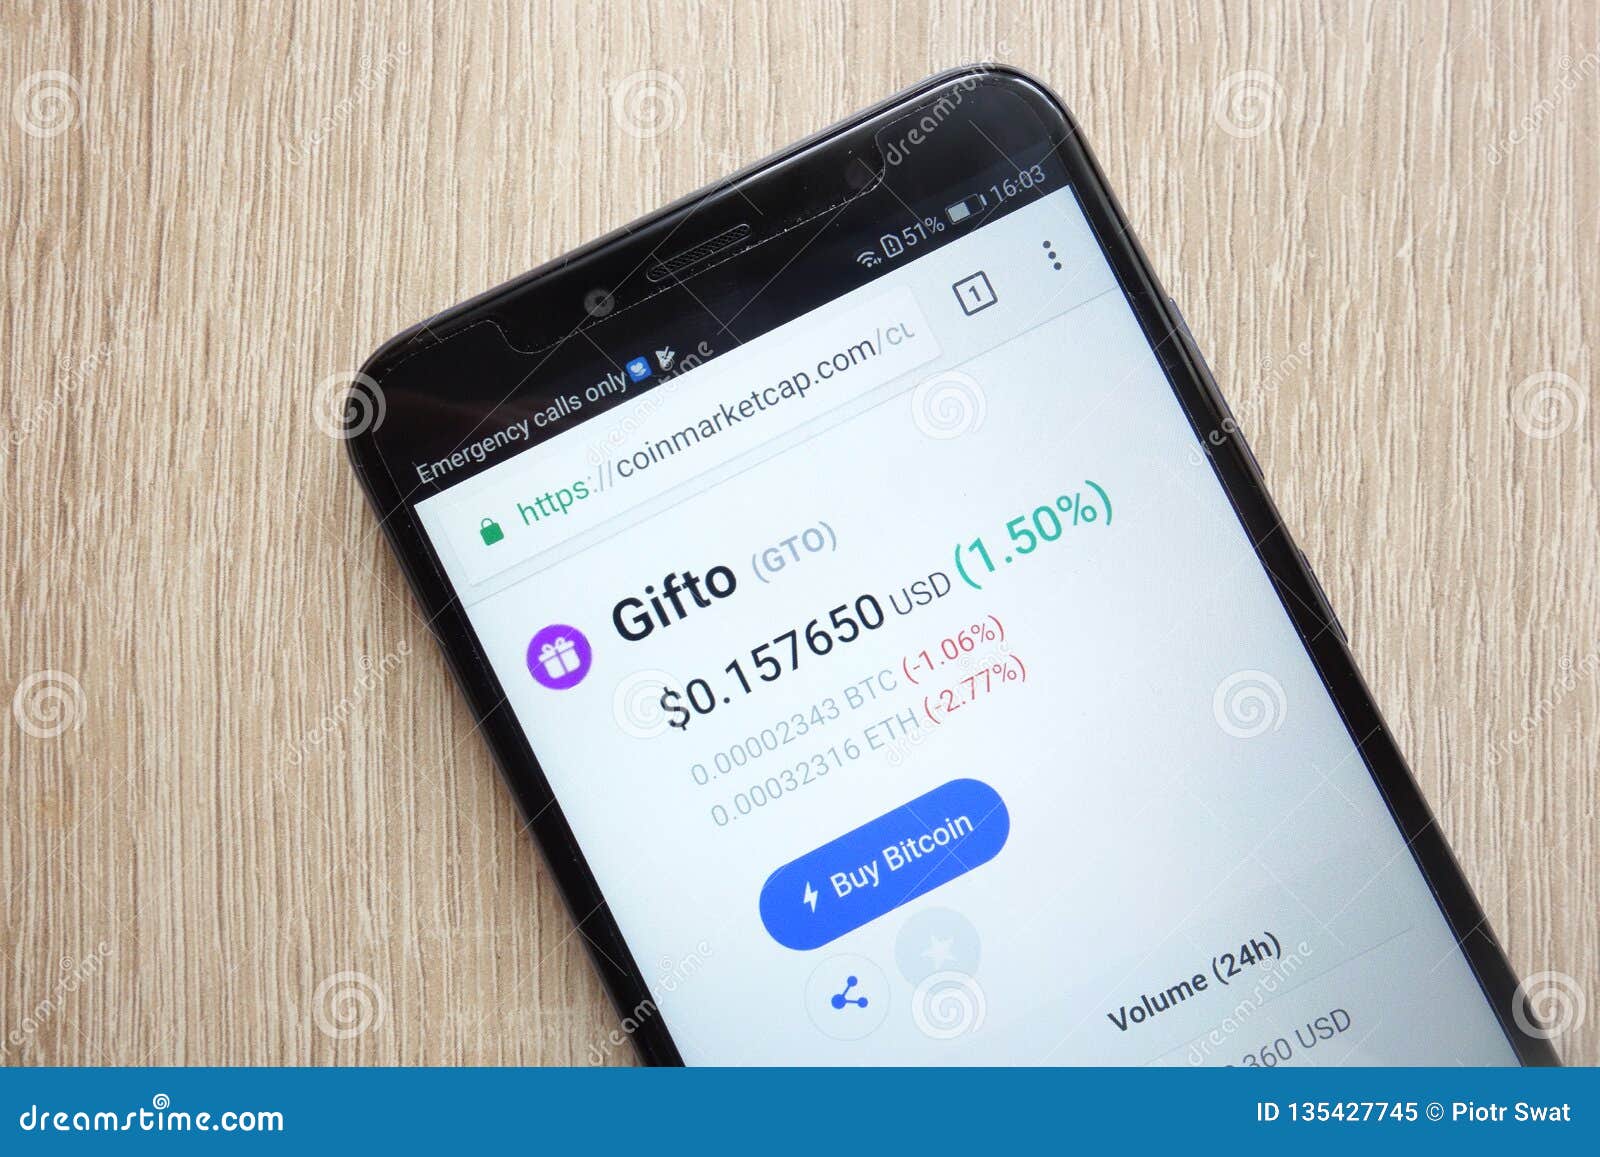 Gifto Gto Cryptocurrency Price On Coinmarketcap Com Website Displayed On Huawei Y6 2018 Smartphone Editorial Image Image Of Mining Financial 135427745